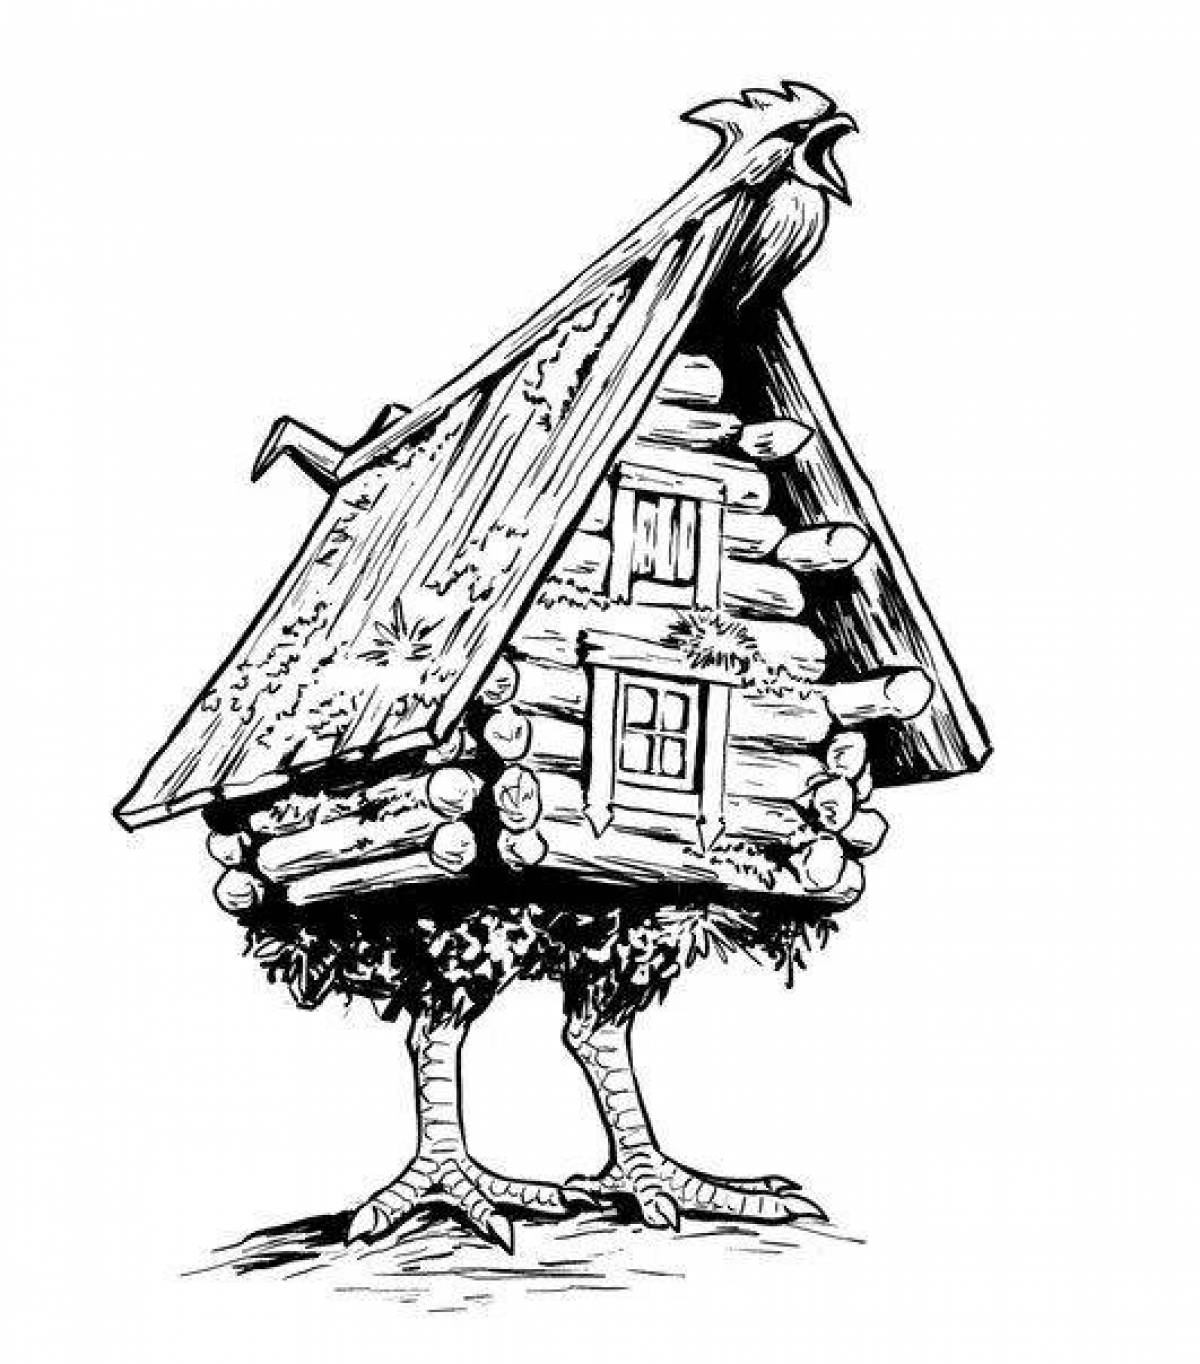 Coloring book picturesque baba yaga's hut